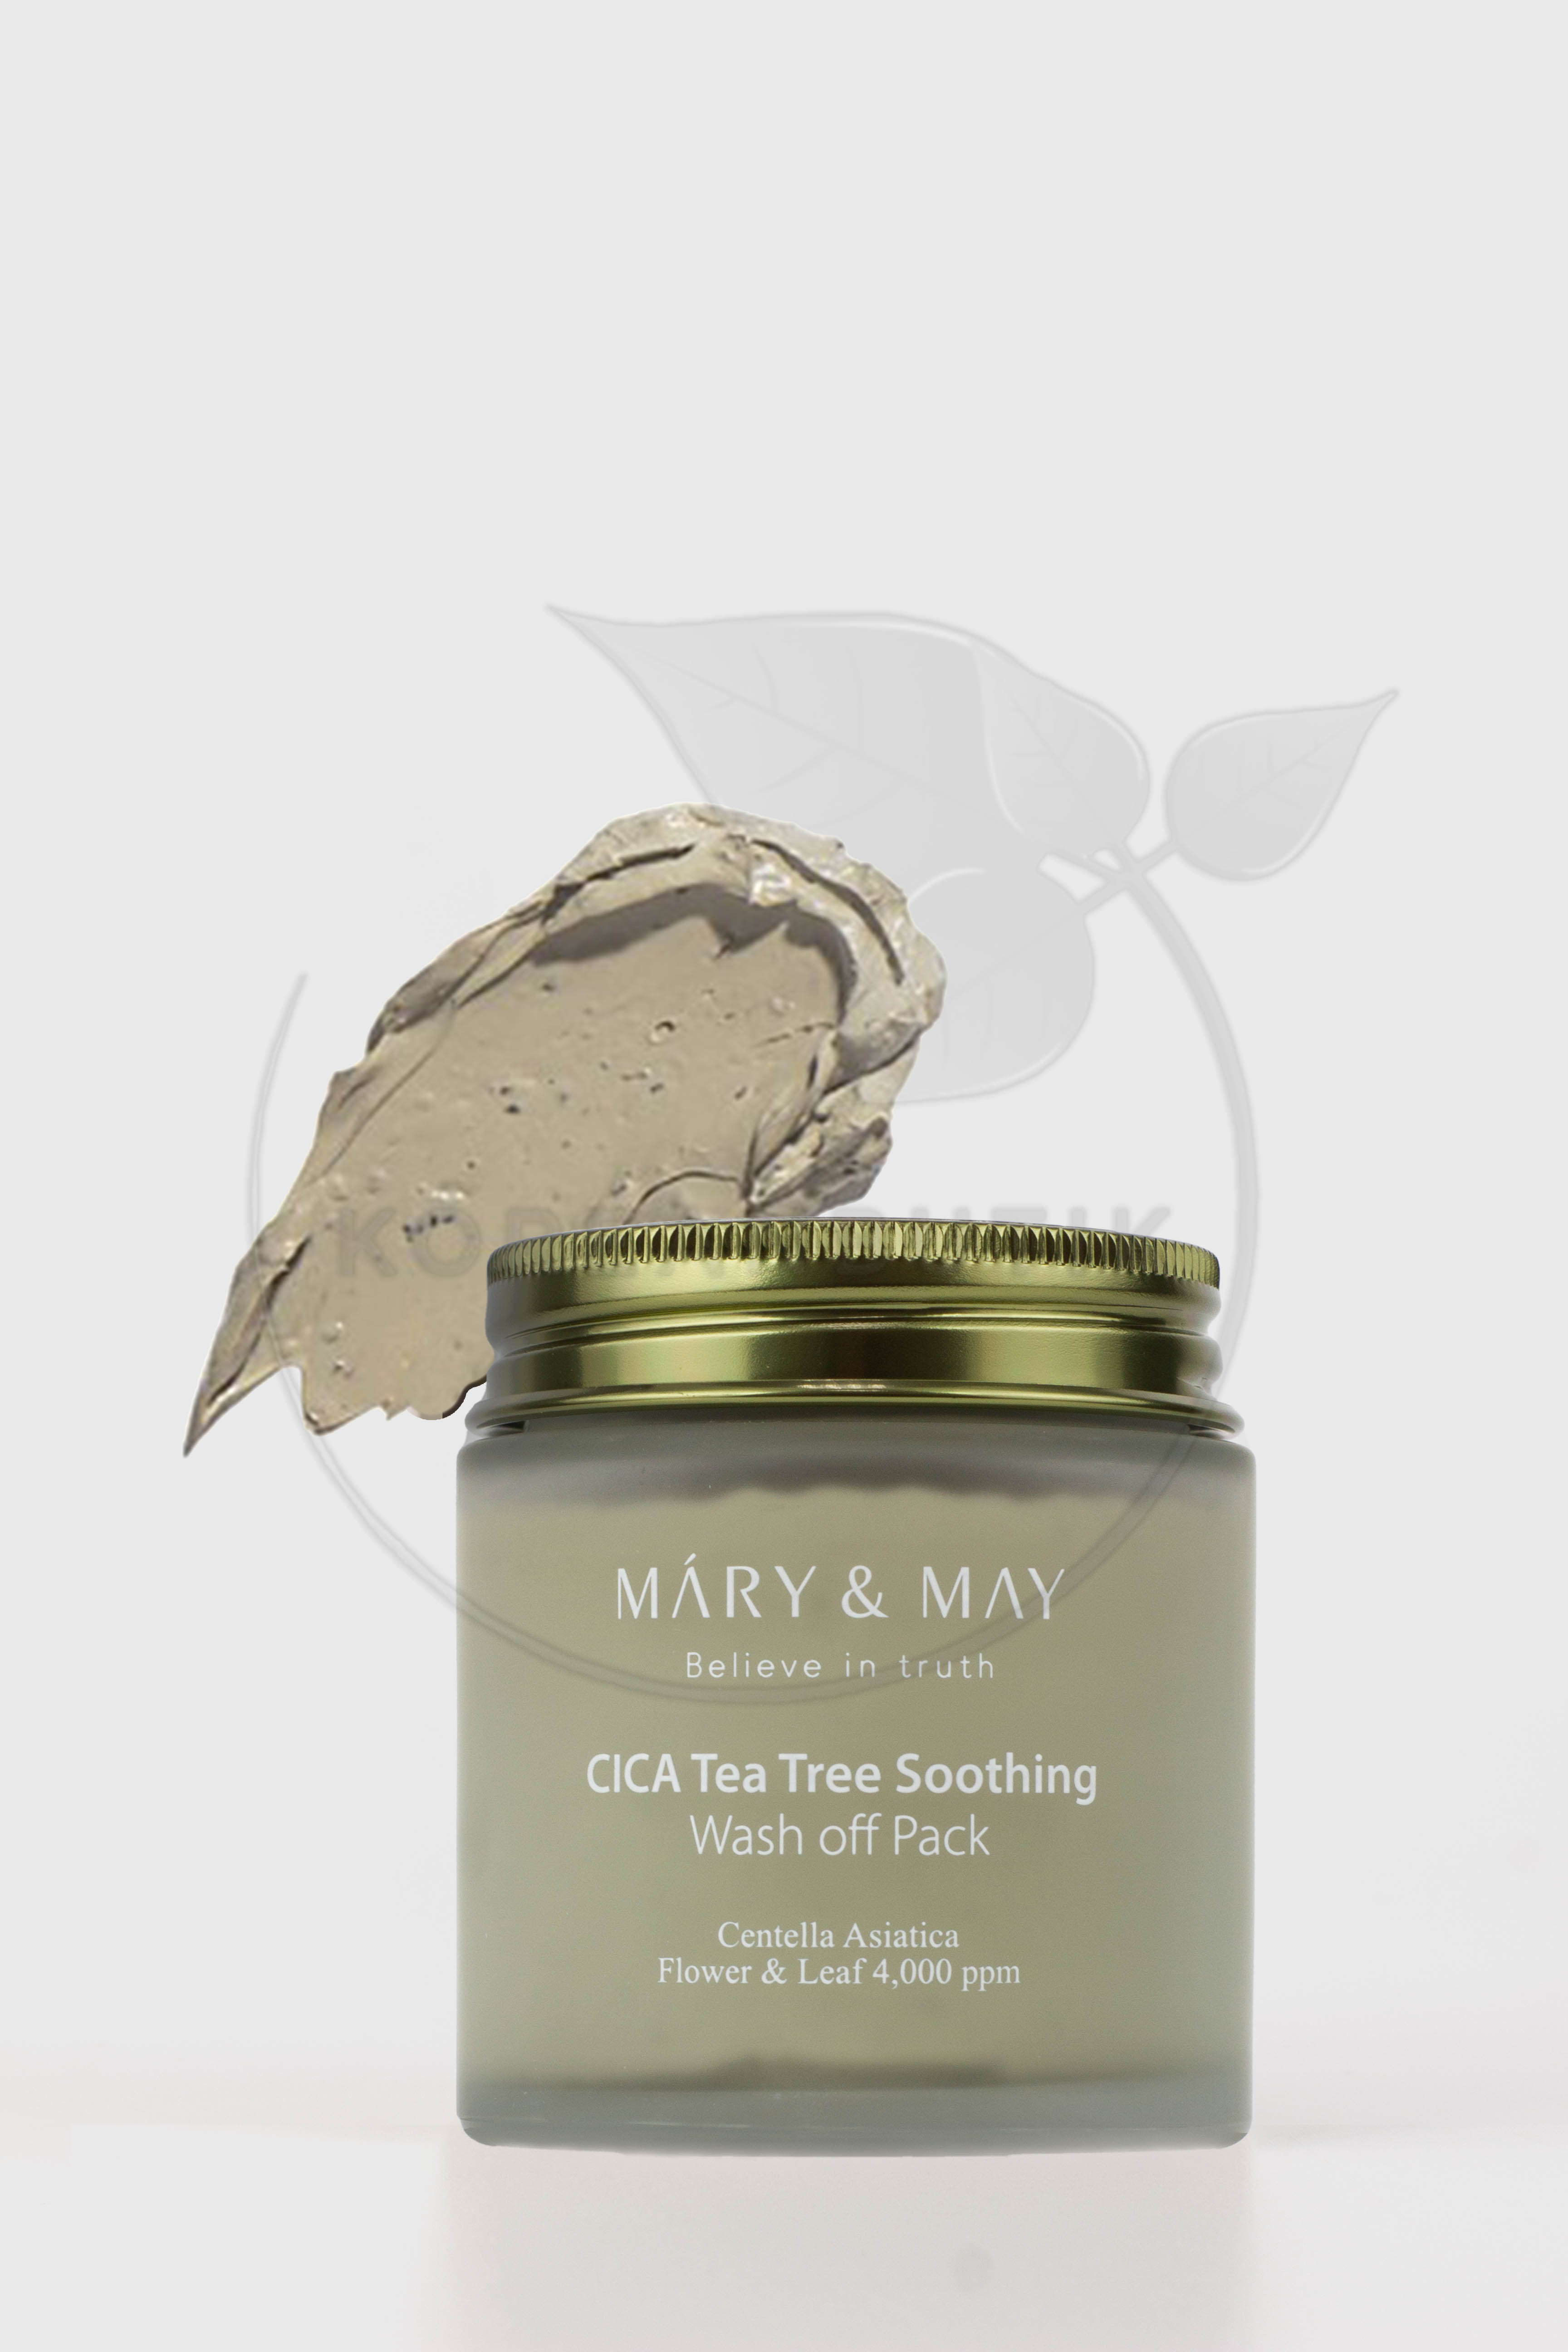  Mary&May Cica TeaTree Soothing Wash off Pack 125g 